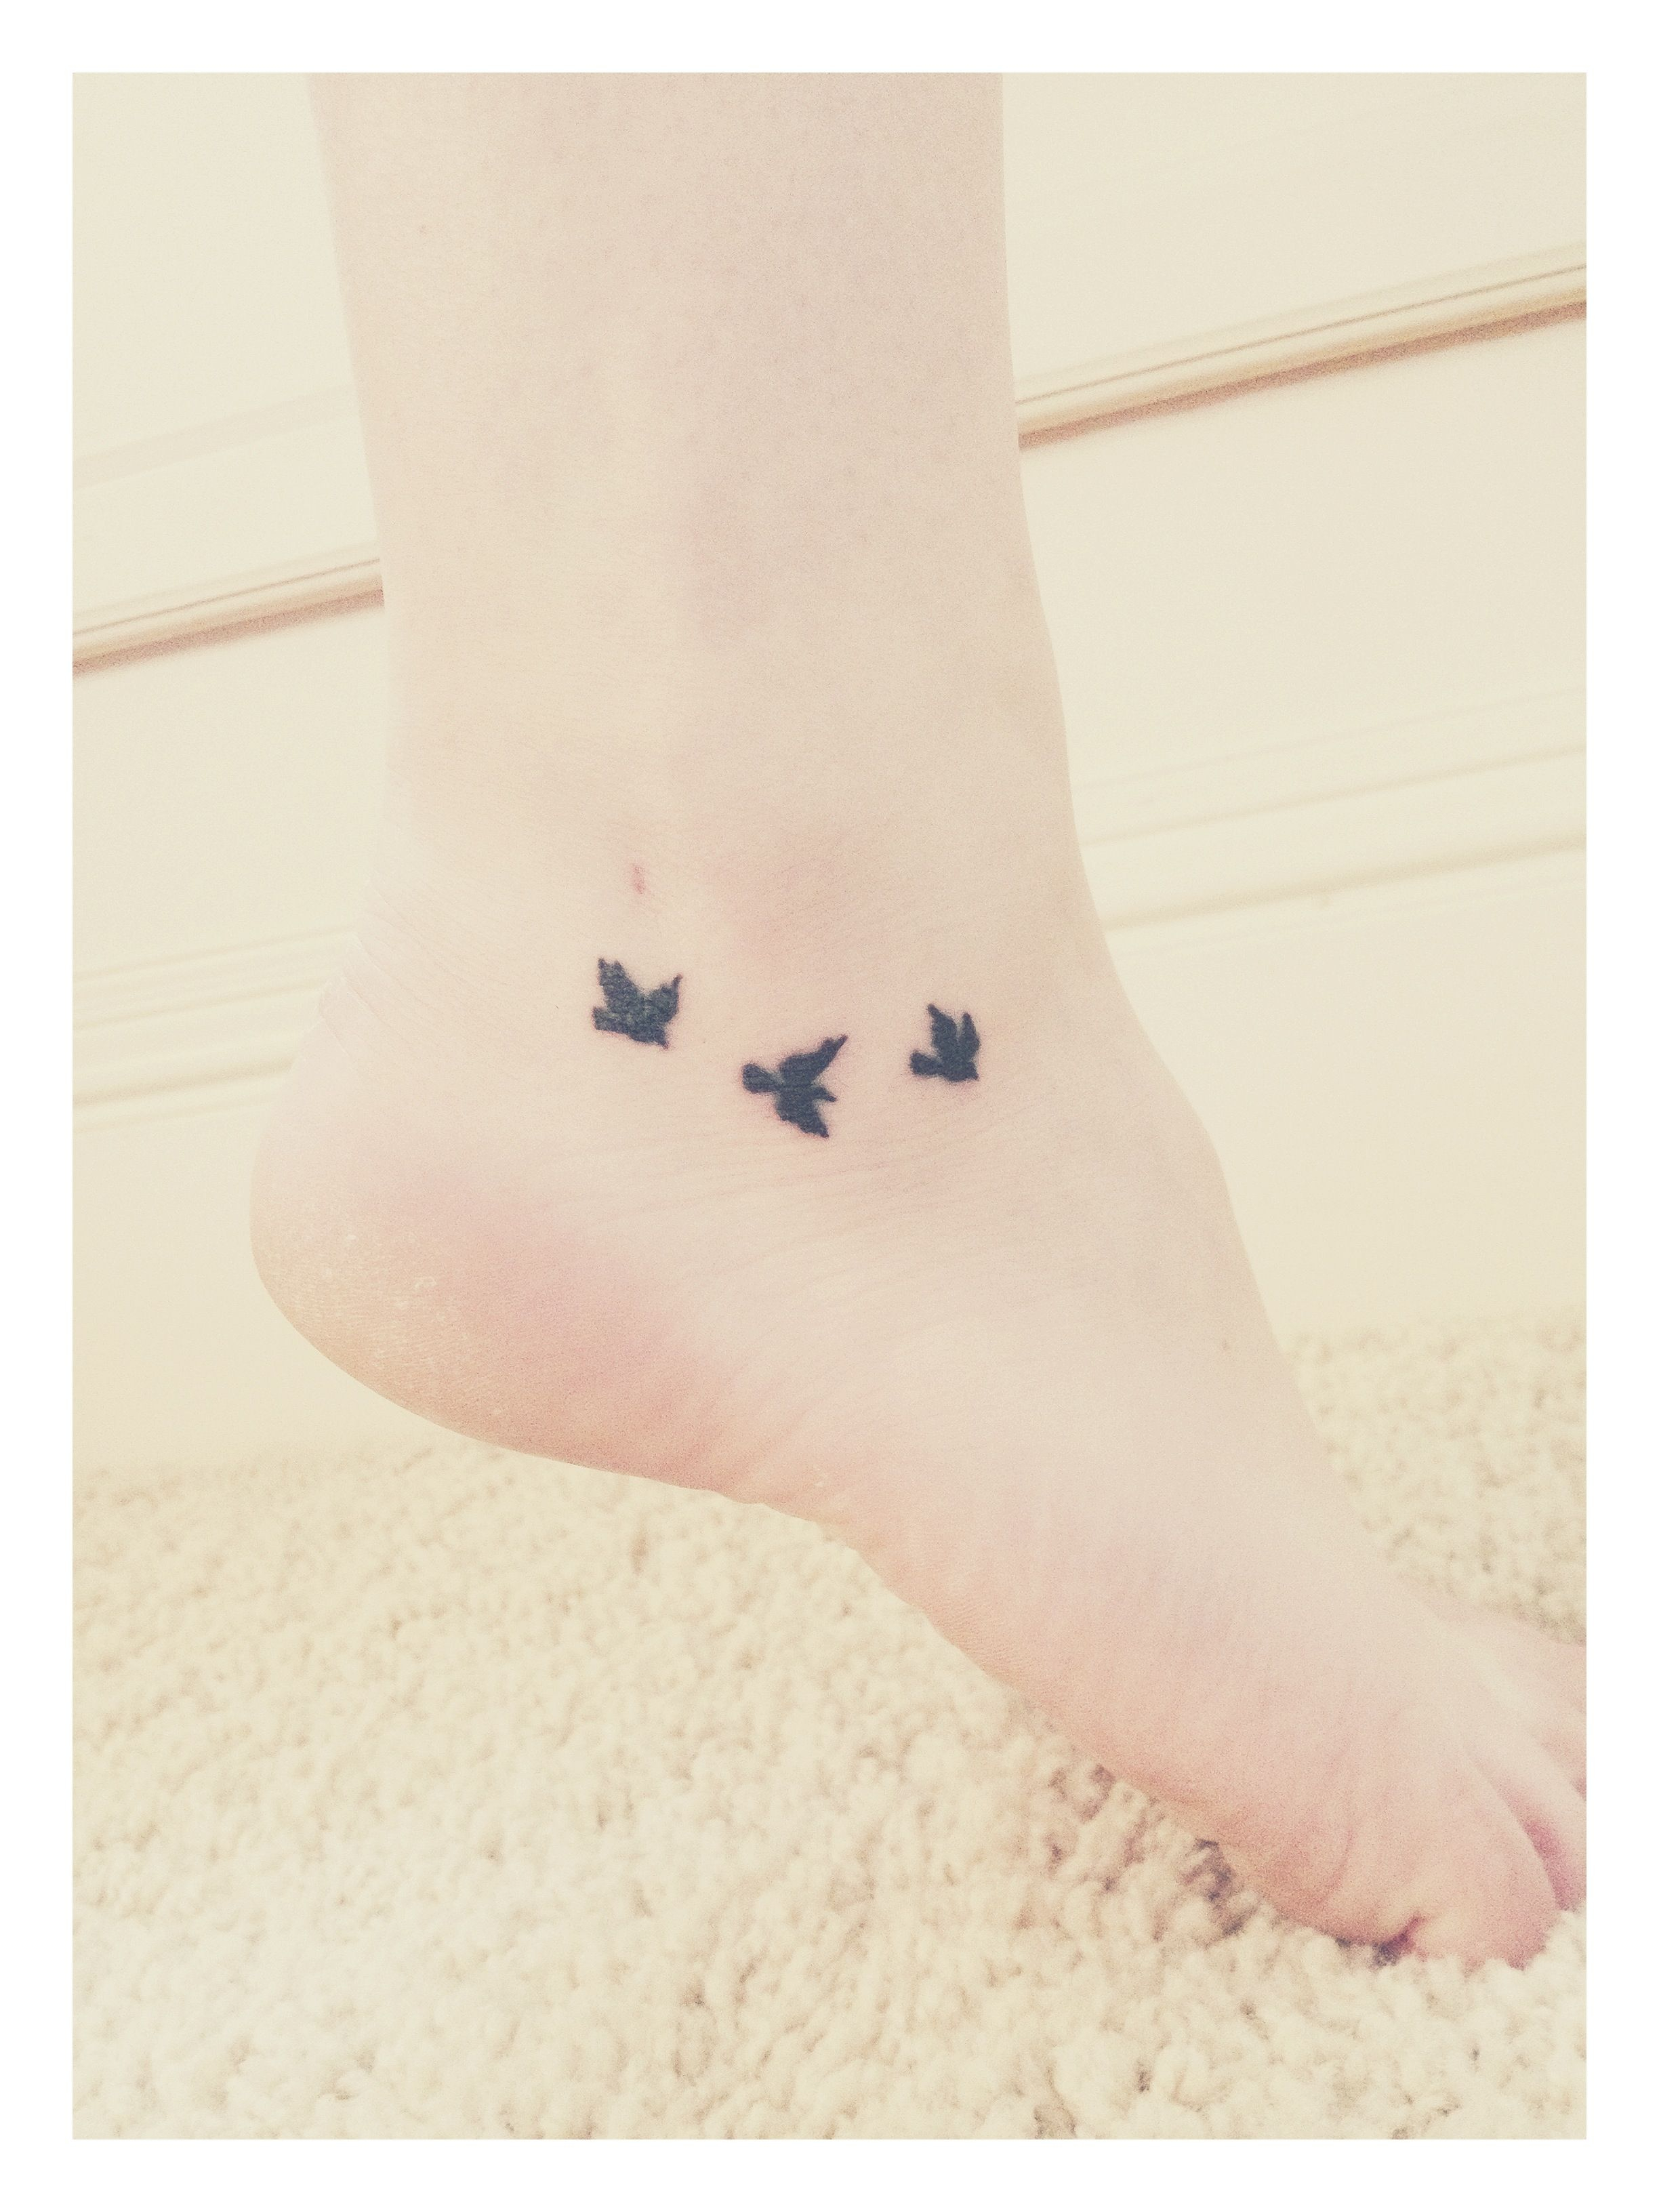 Bird Tattoo Below The Ankle For Matthew 6 Do Not Worry Atlas in size 2448 X 3264